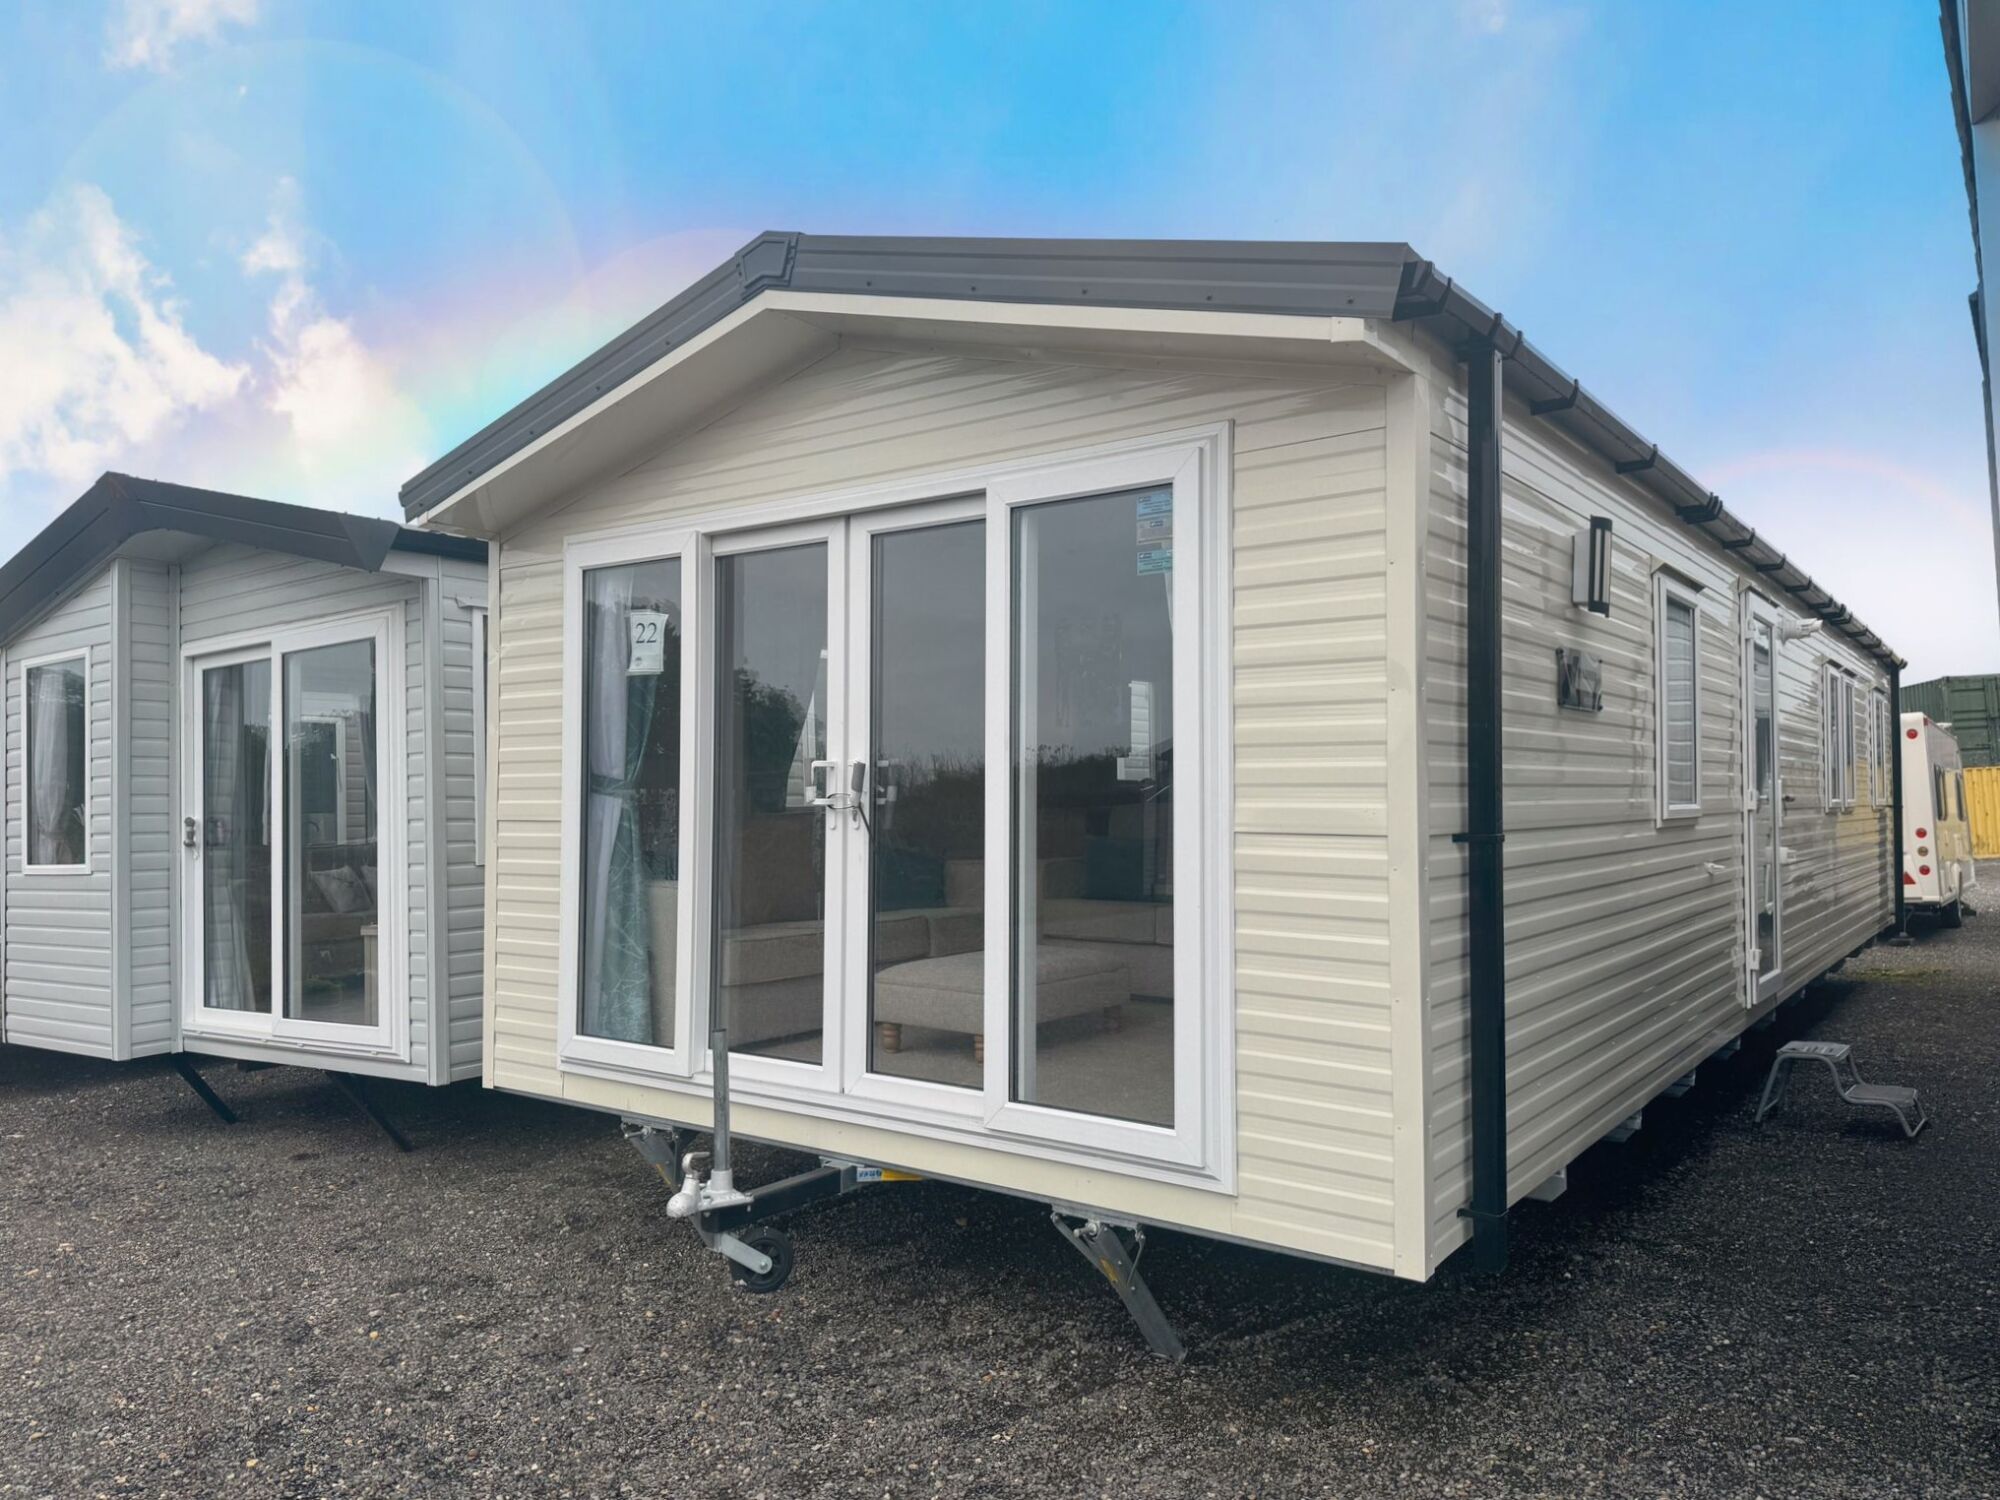 NEW Willerby Malton Exterior side angle static caravan